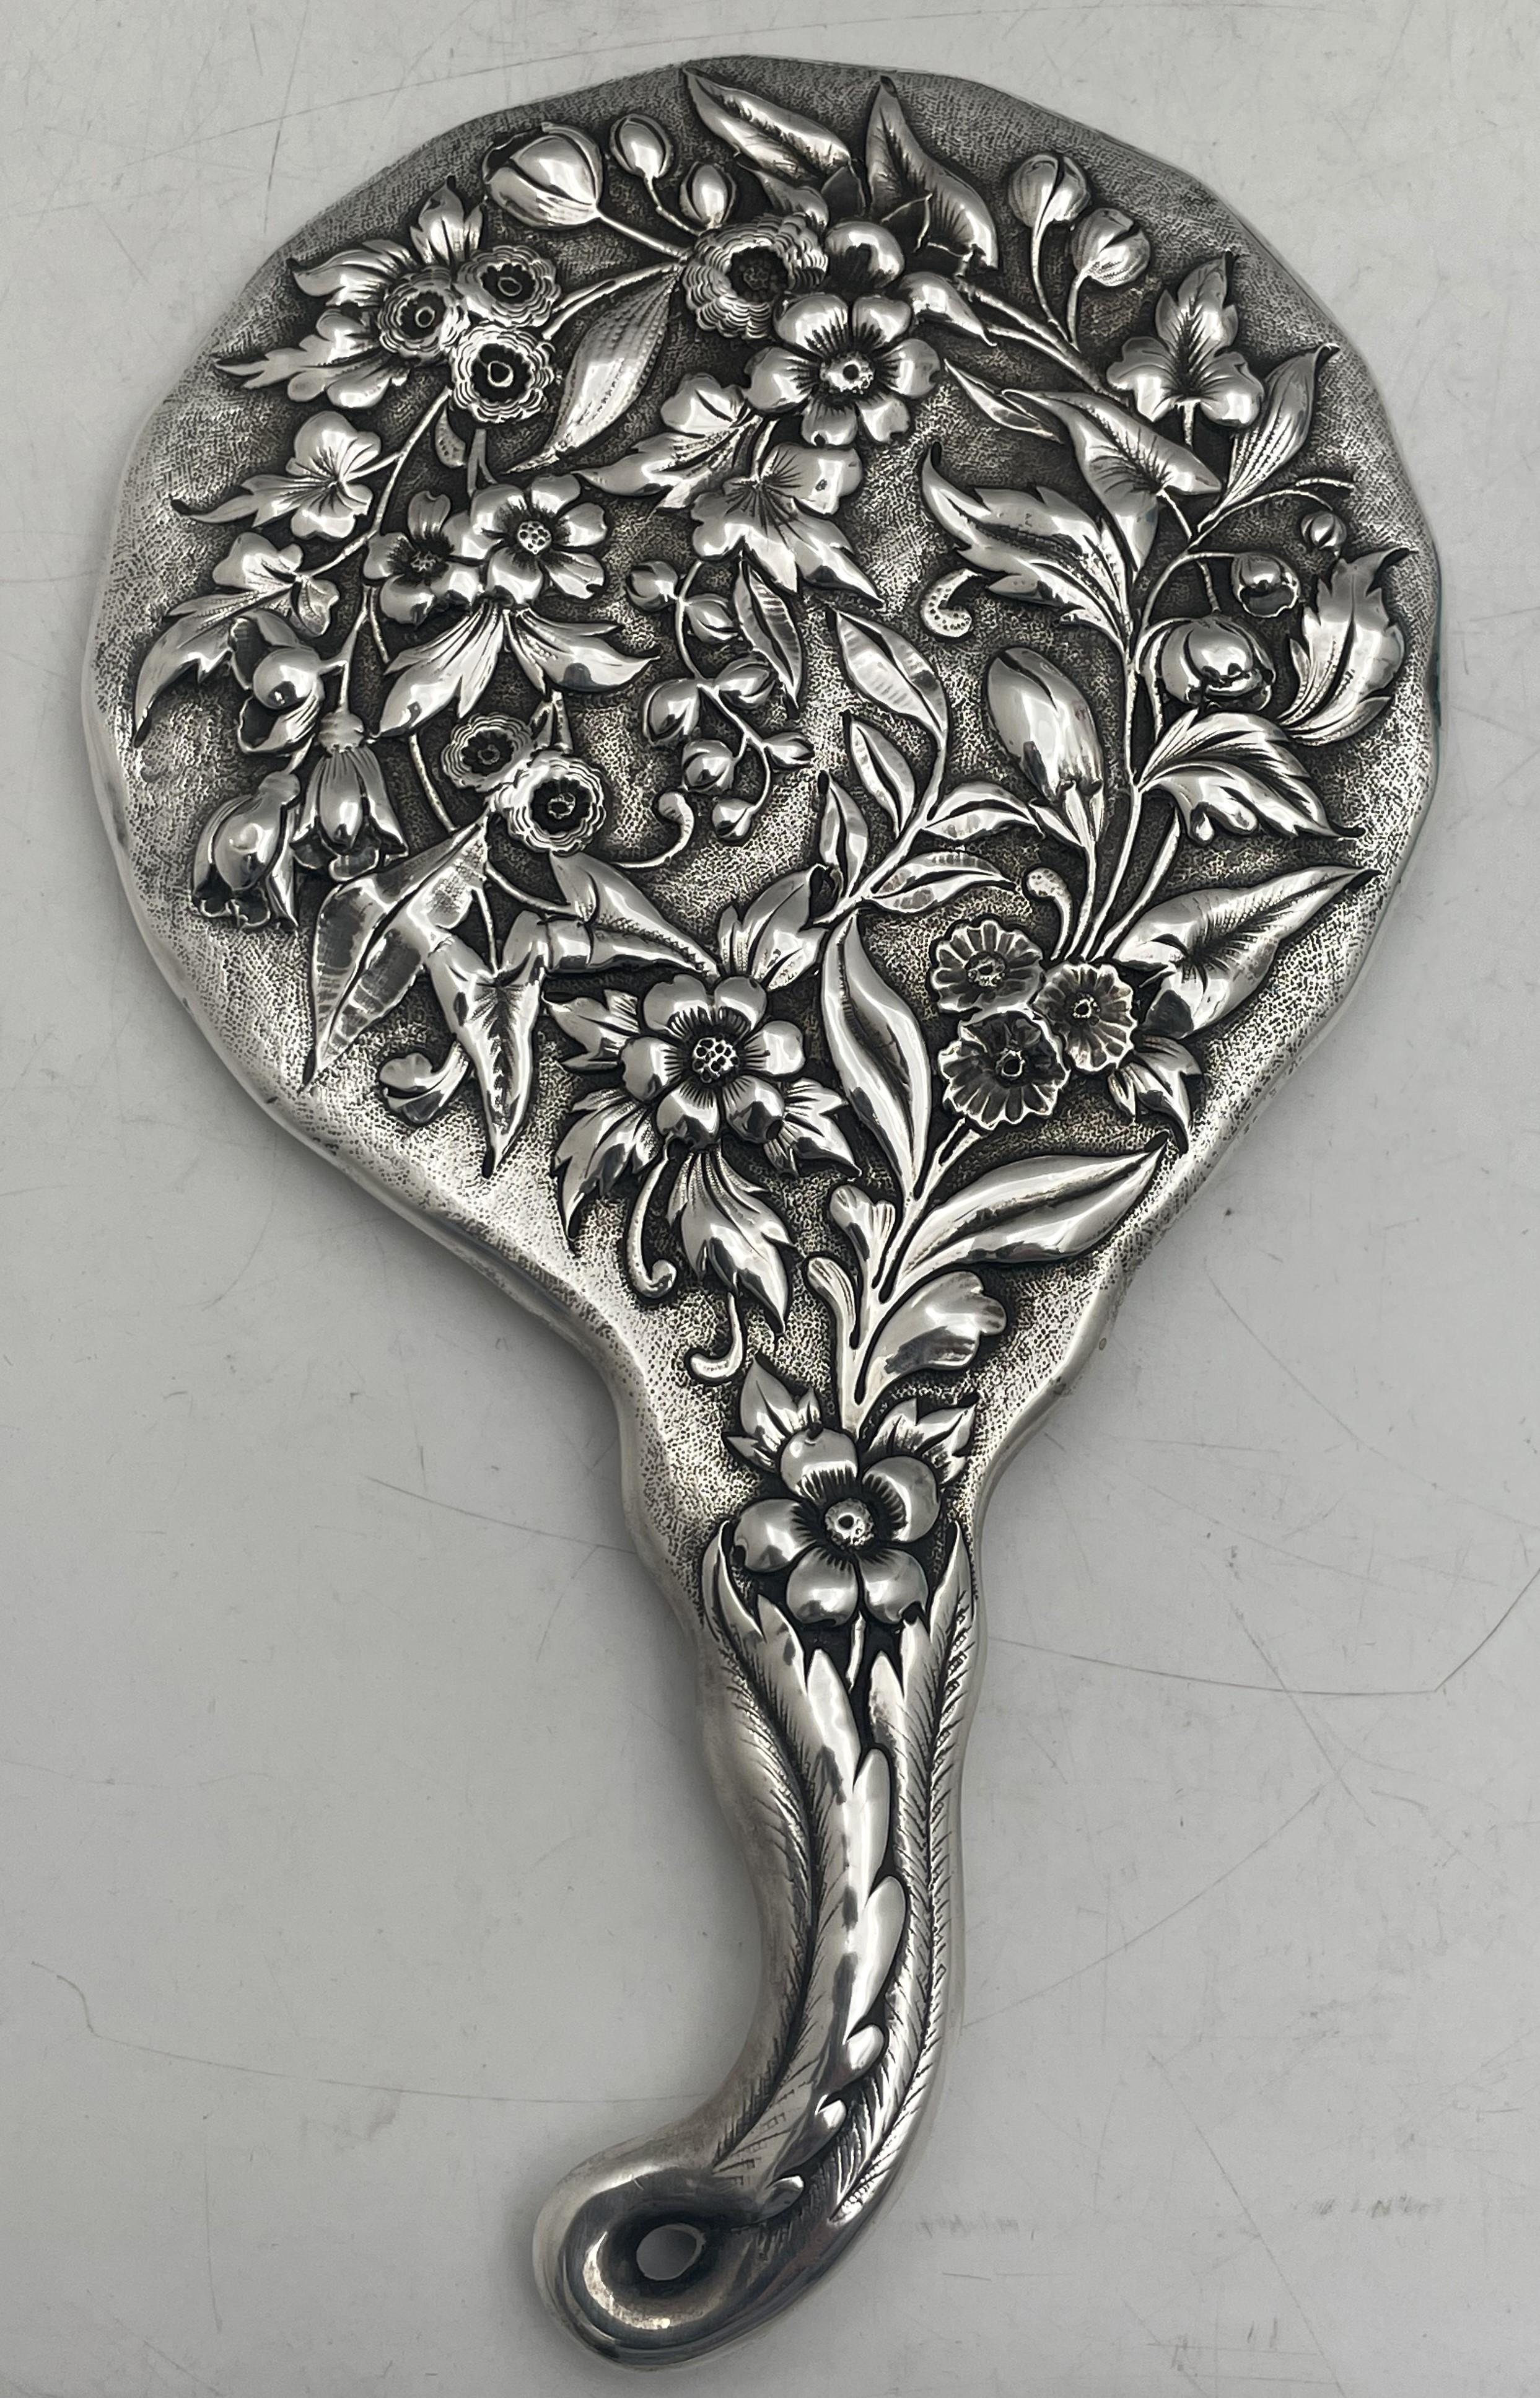 J. E. Caldwell & Co. sterling silver mirror in repousse pattern, beautifully adorned with floral motifs on the back and on the handle, from the late 19th century. It measures 9 3/8'' in length by 5 5/8'' in width by 5/8'' in depth and bears